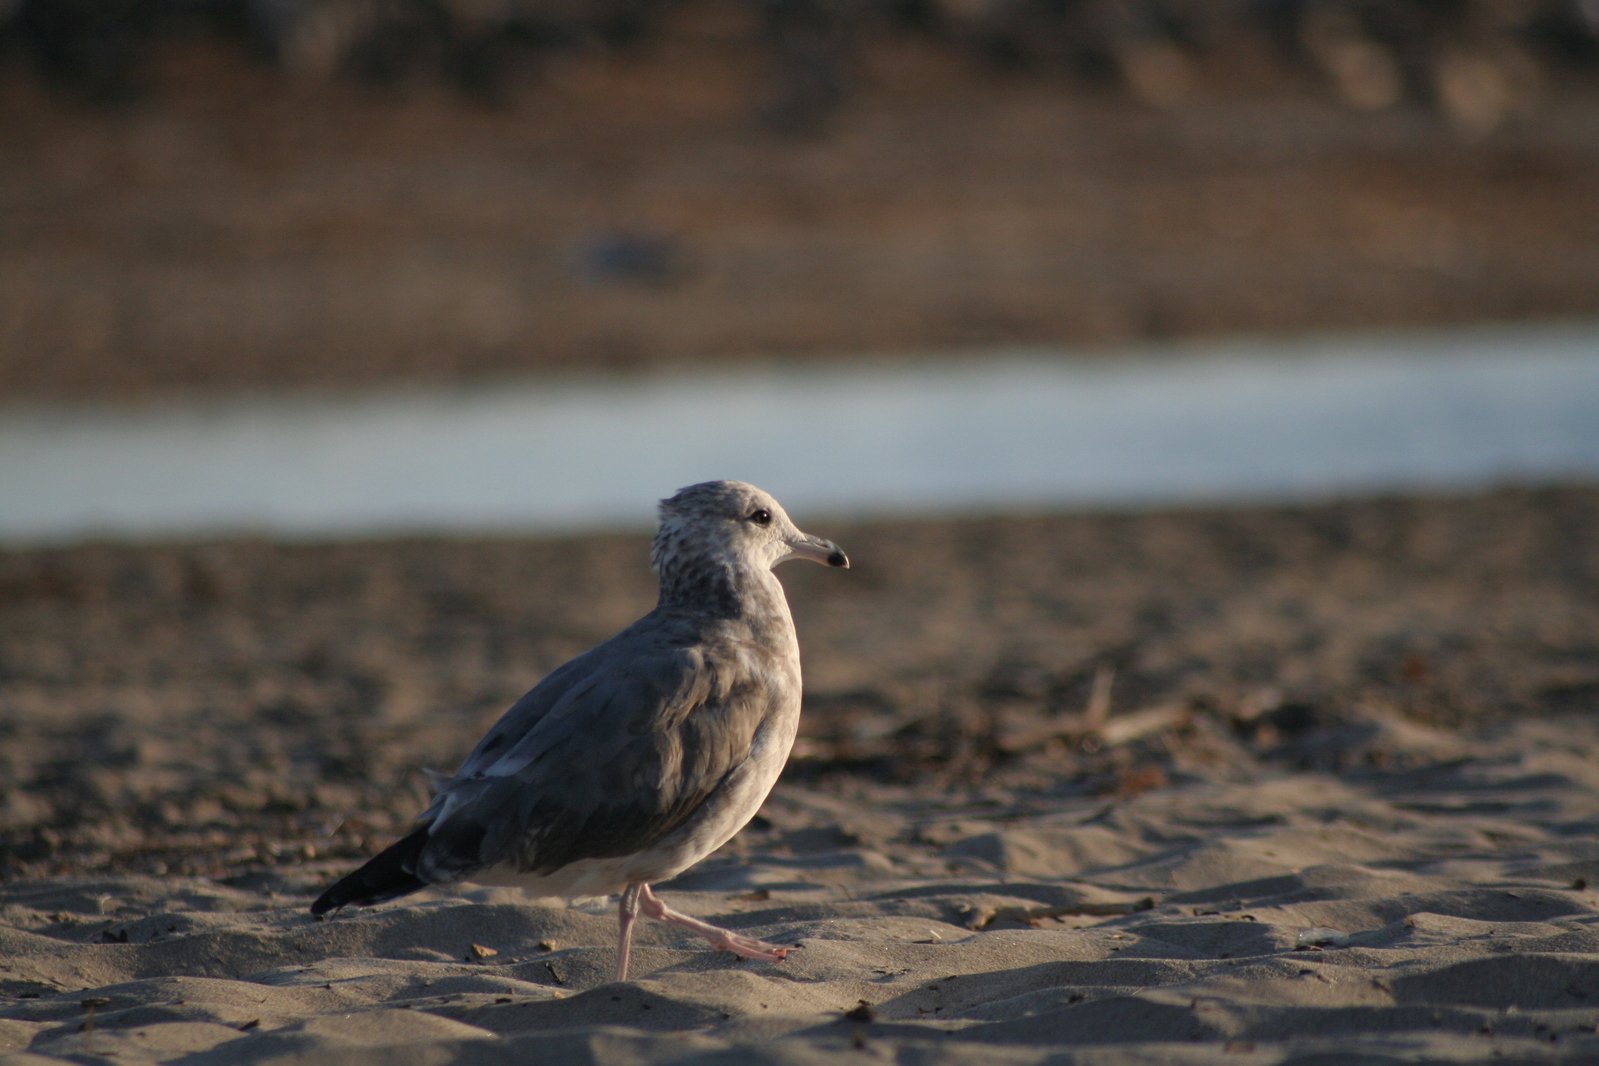 a small gray and black bird walking across a sandy area